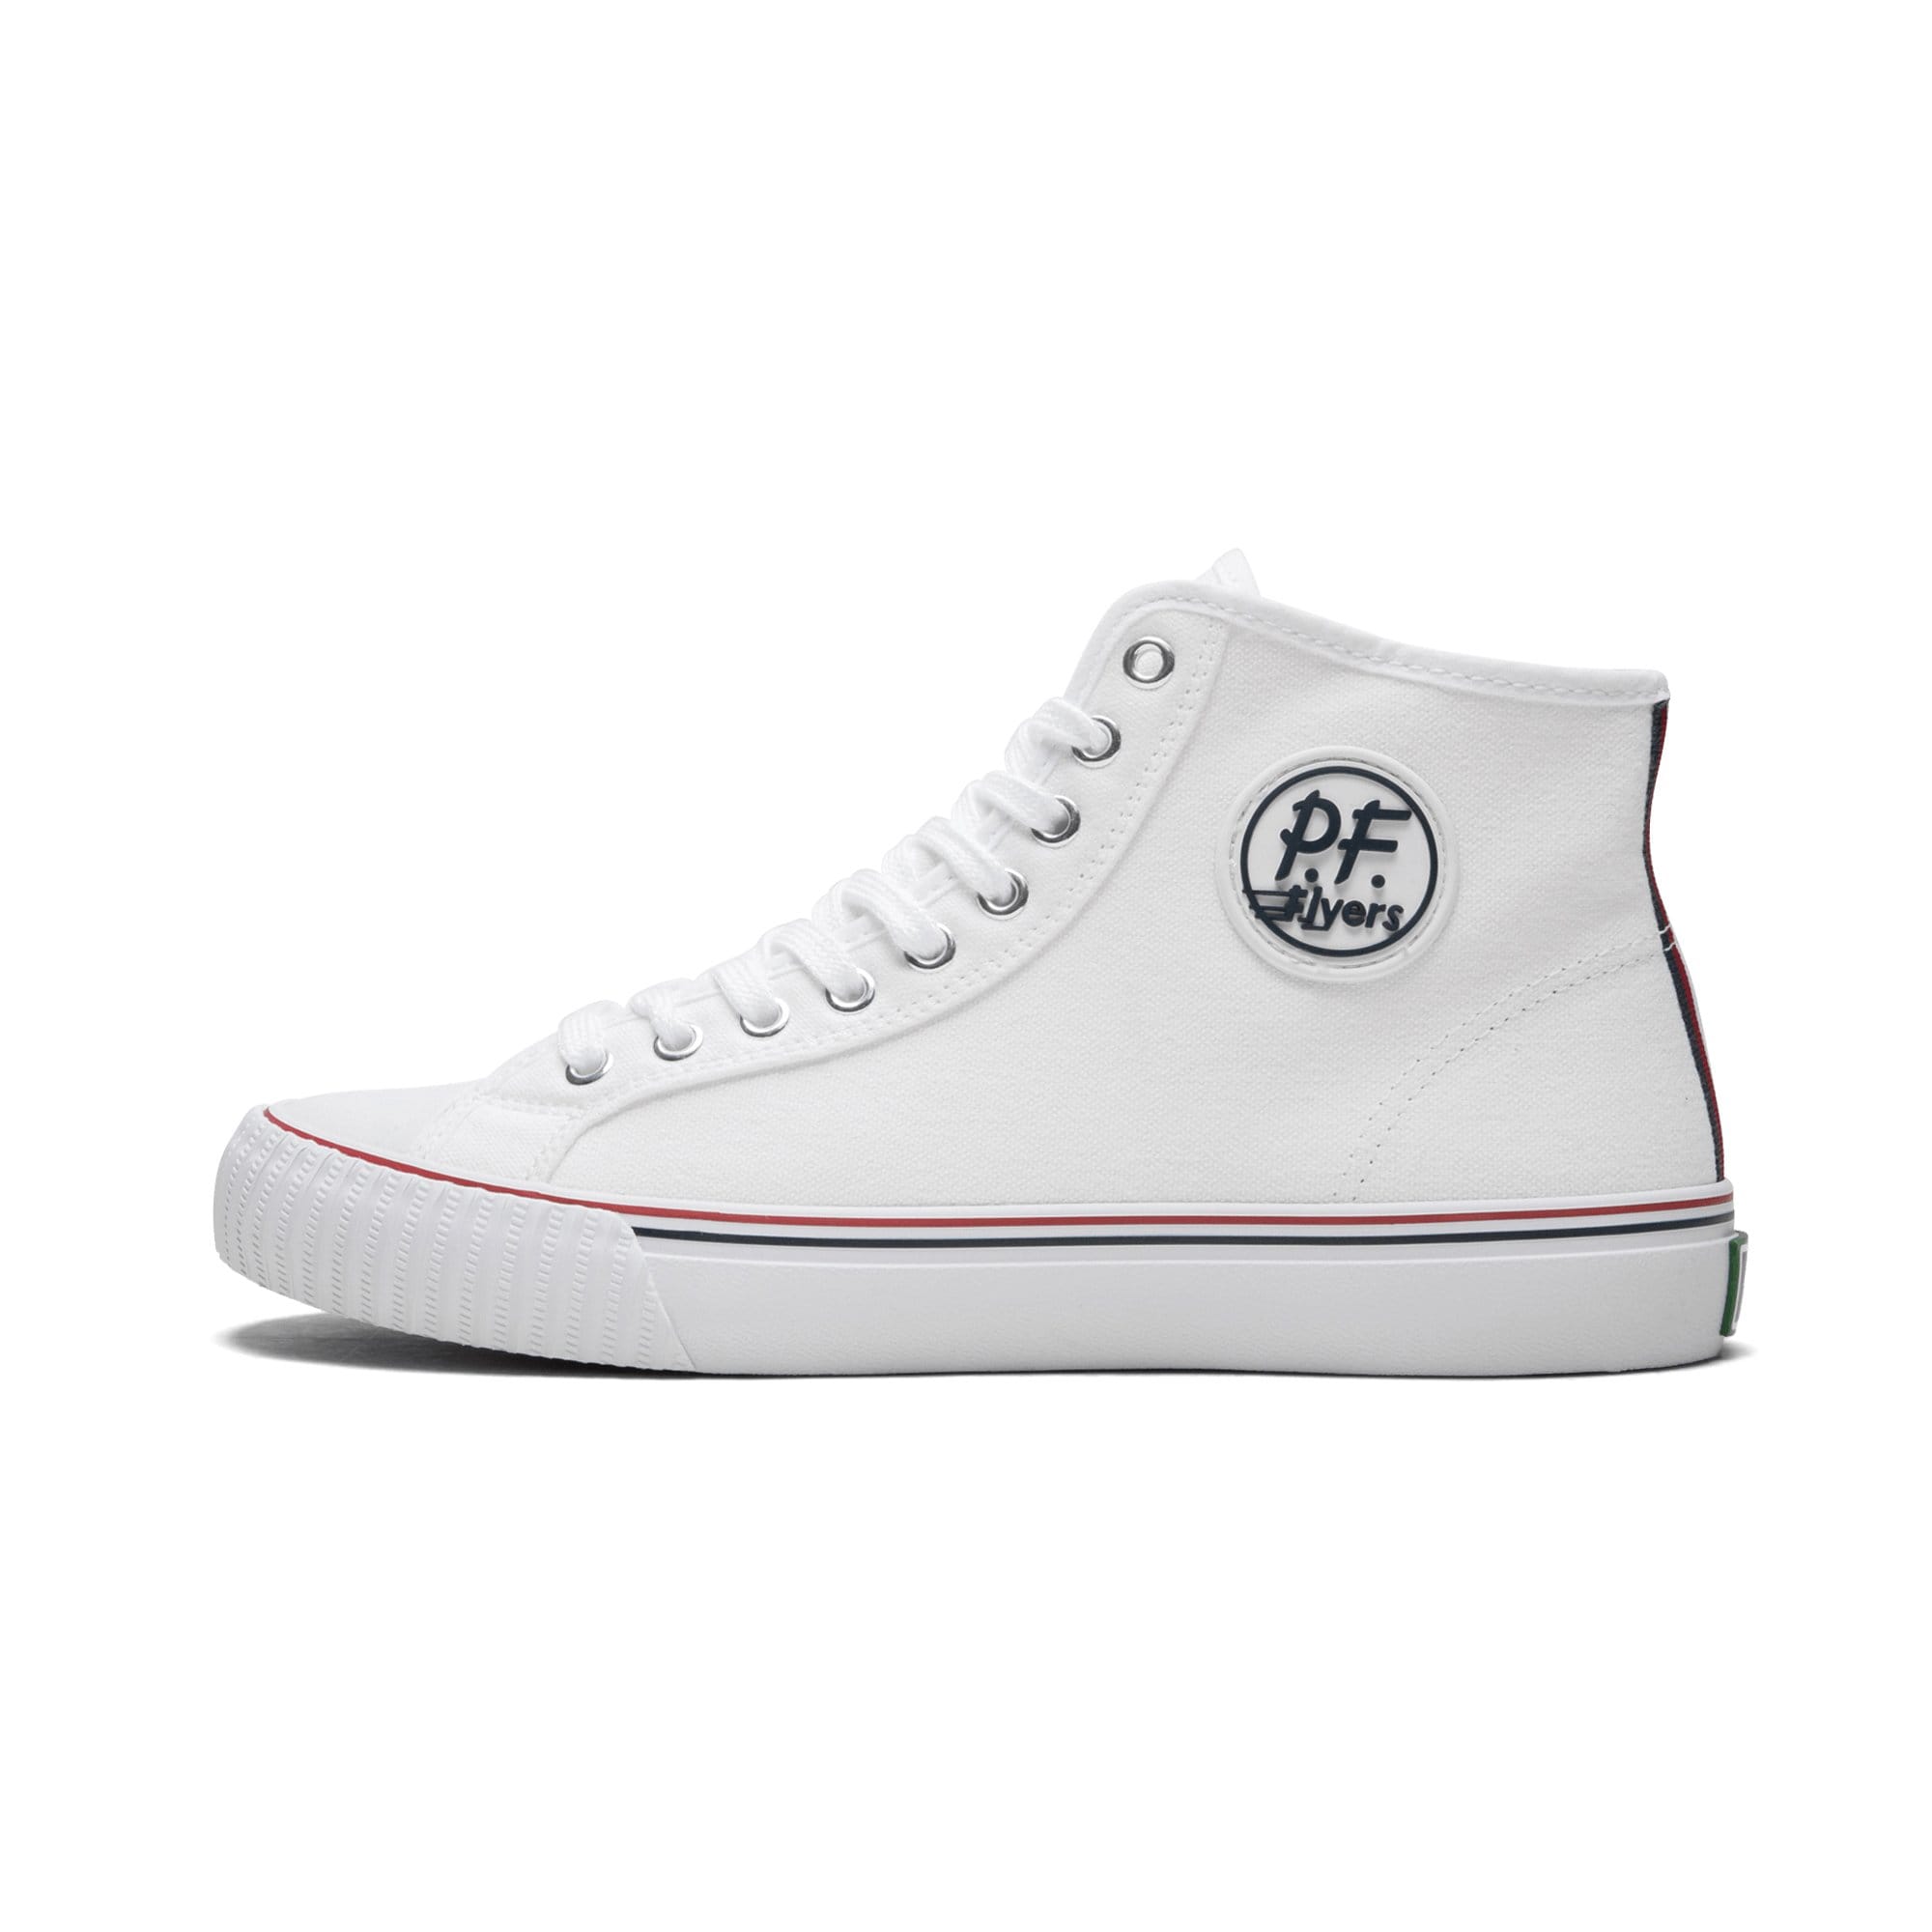 where to buy pf flyers near me